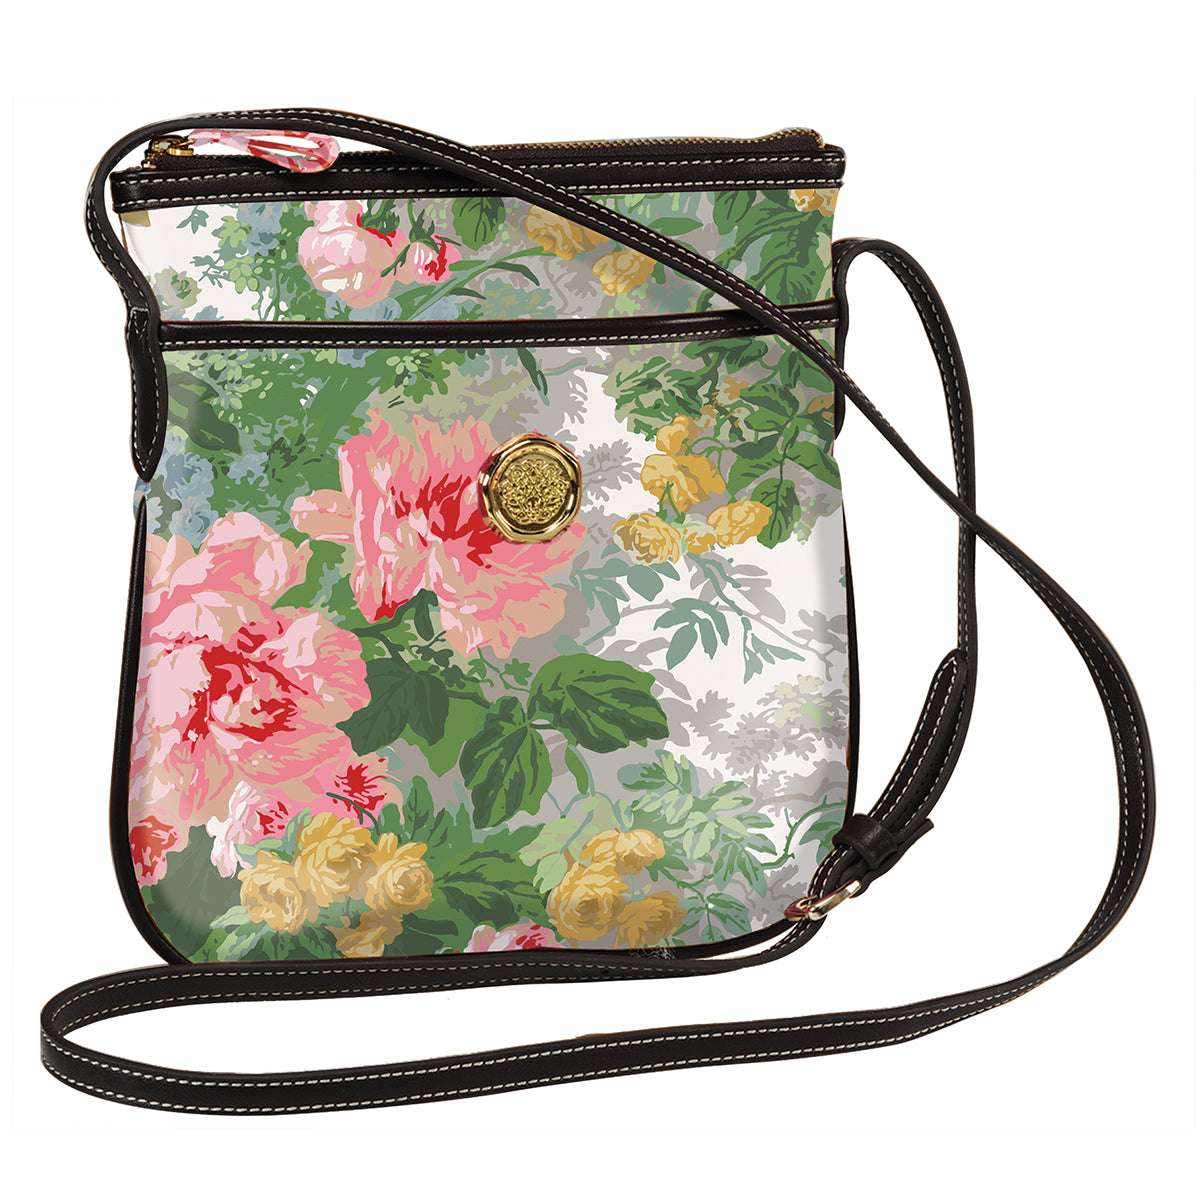 a floral print purse with a black strap.